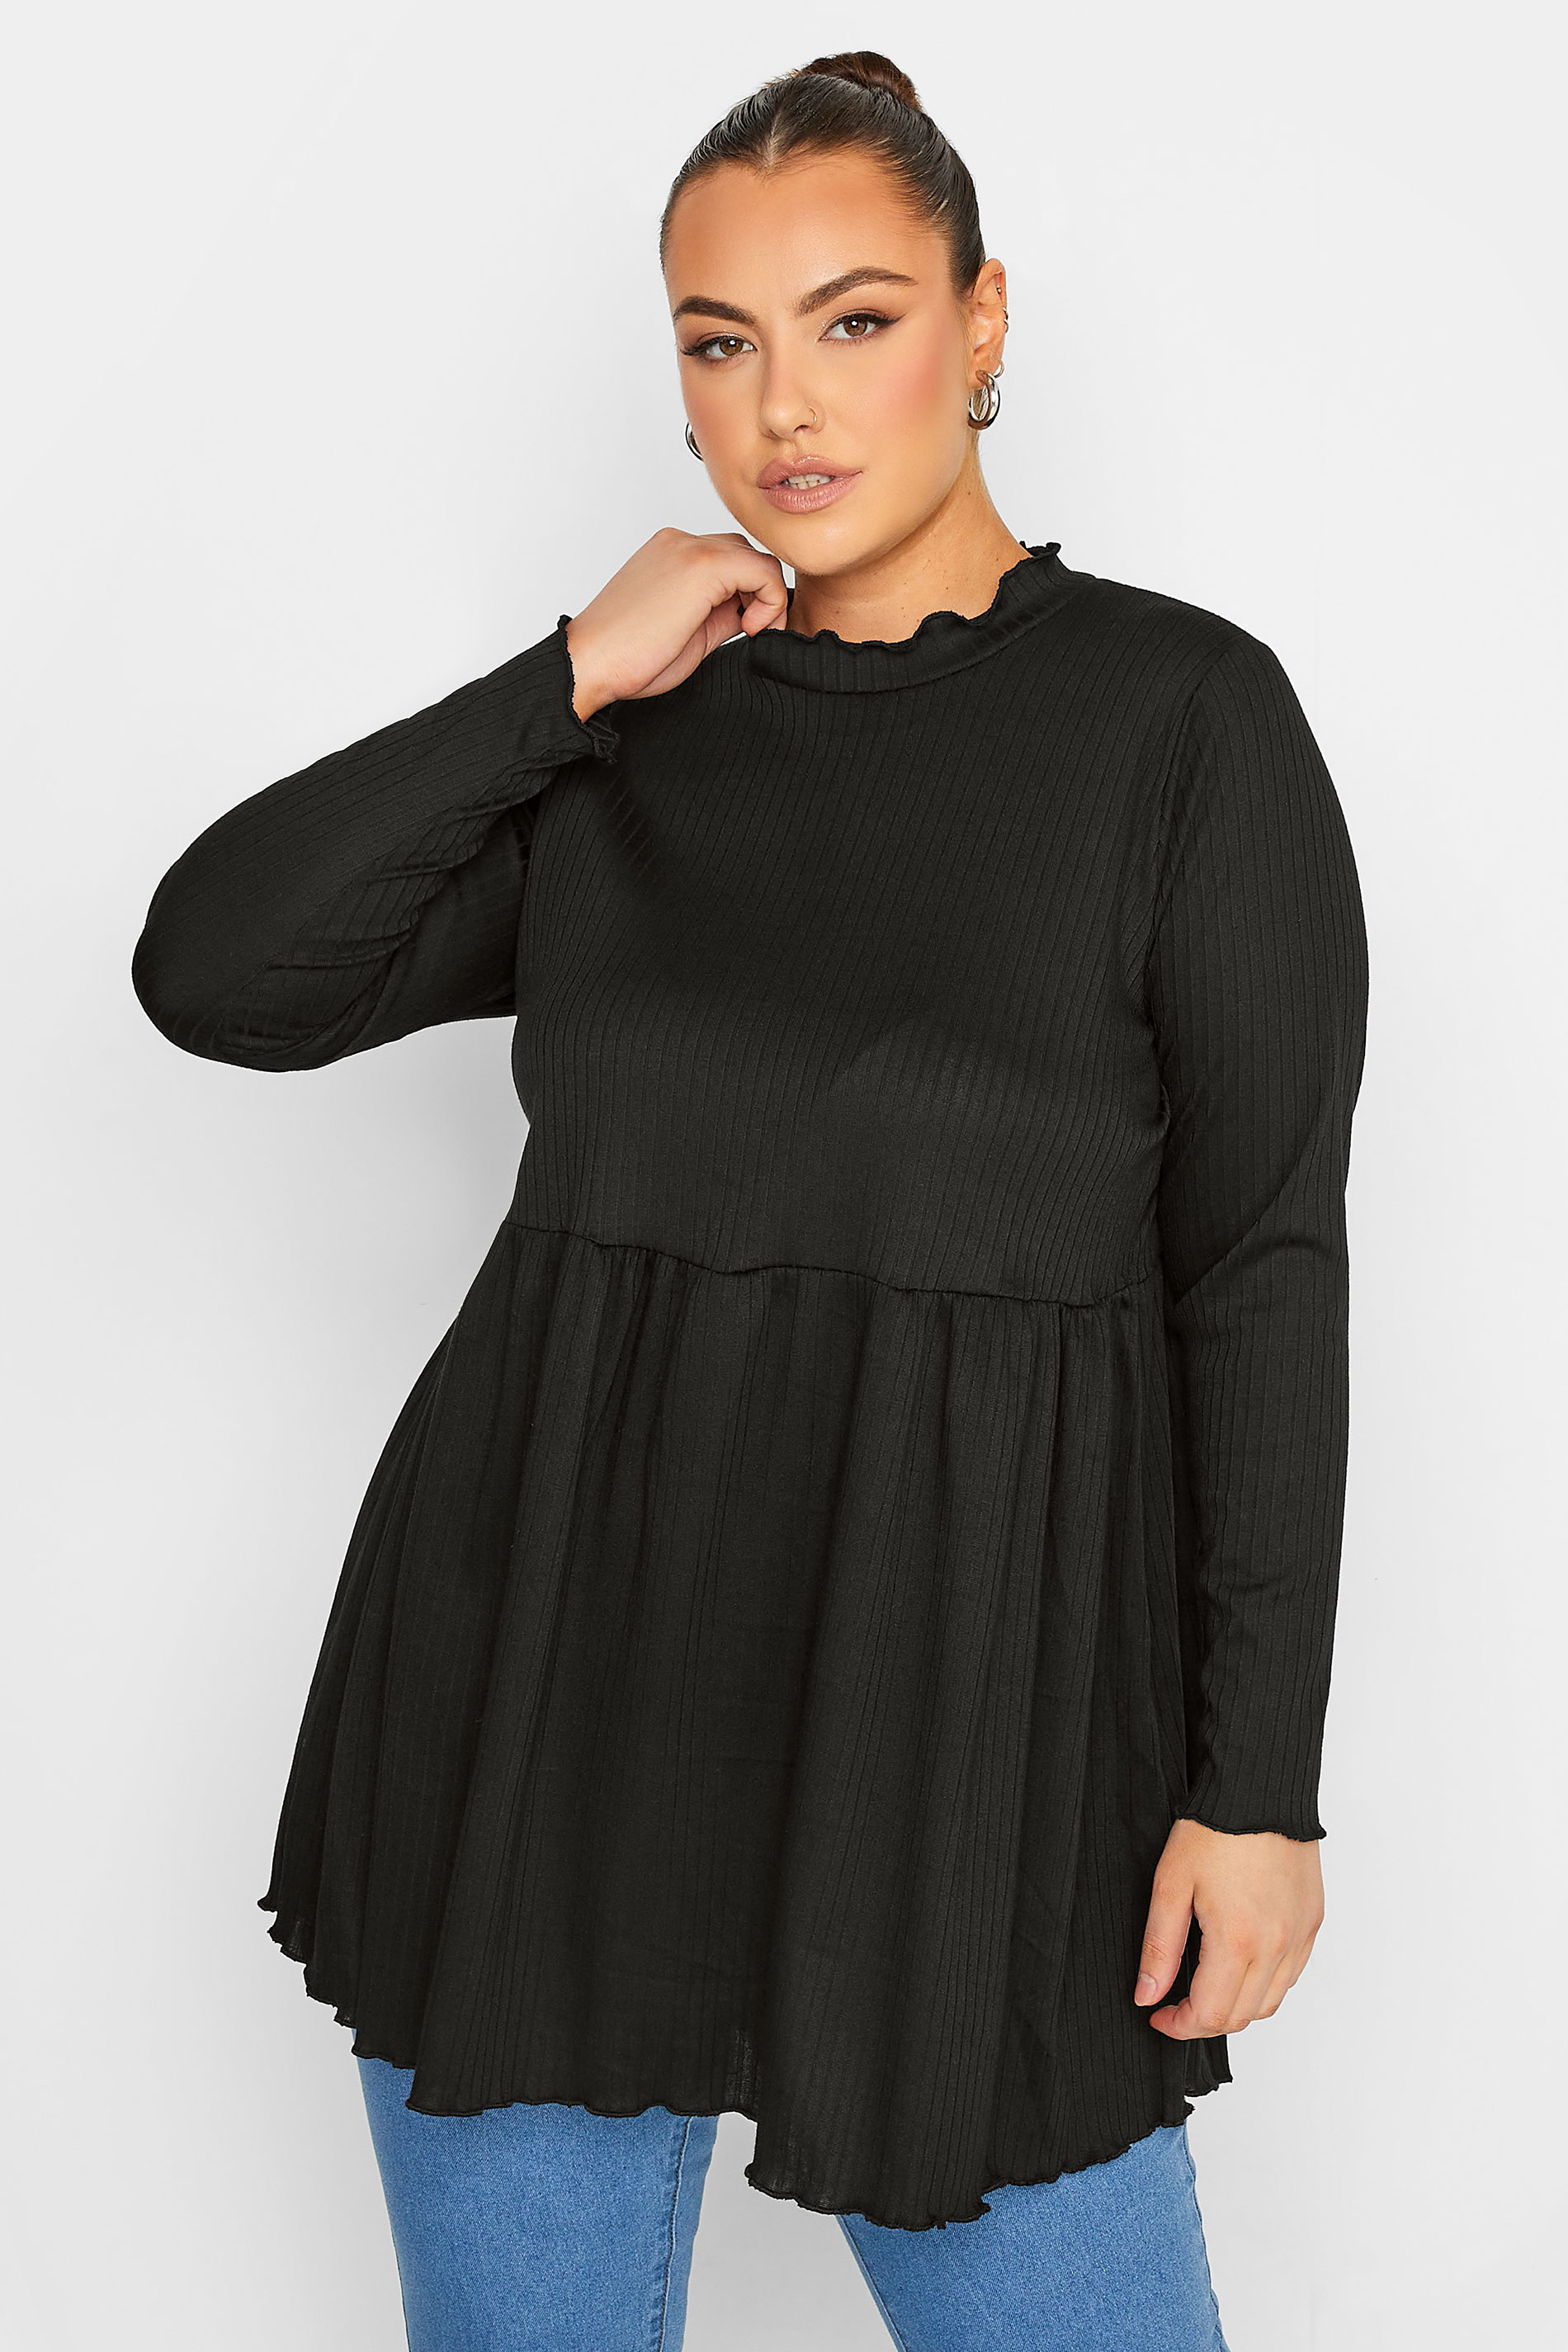 LIMITED COLLECTION Plus Size Black Peplum Lettuce Hem Top | Yours Clothing  1